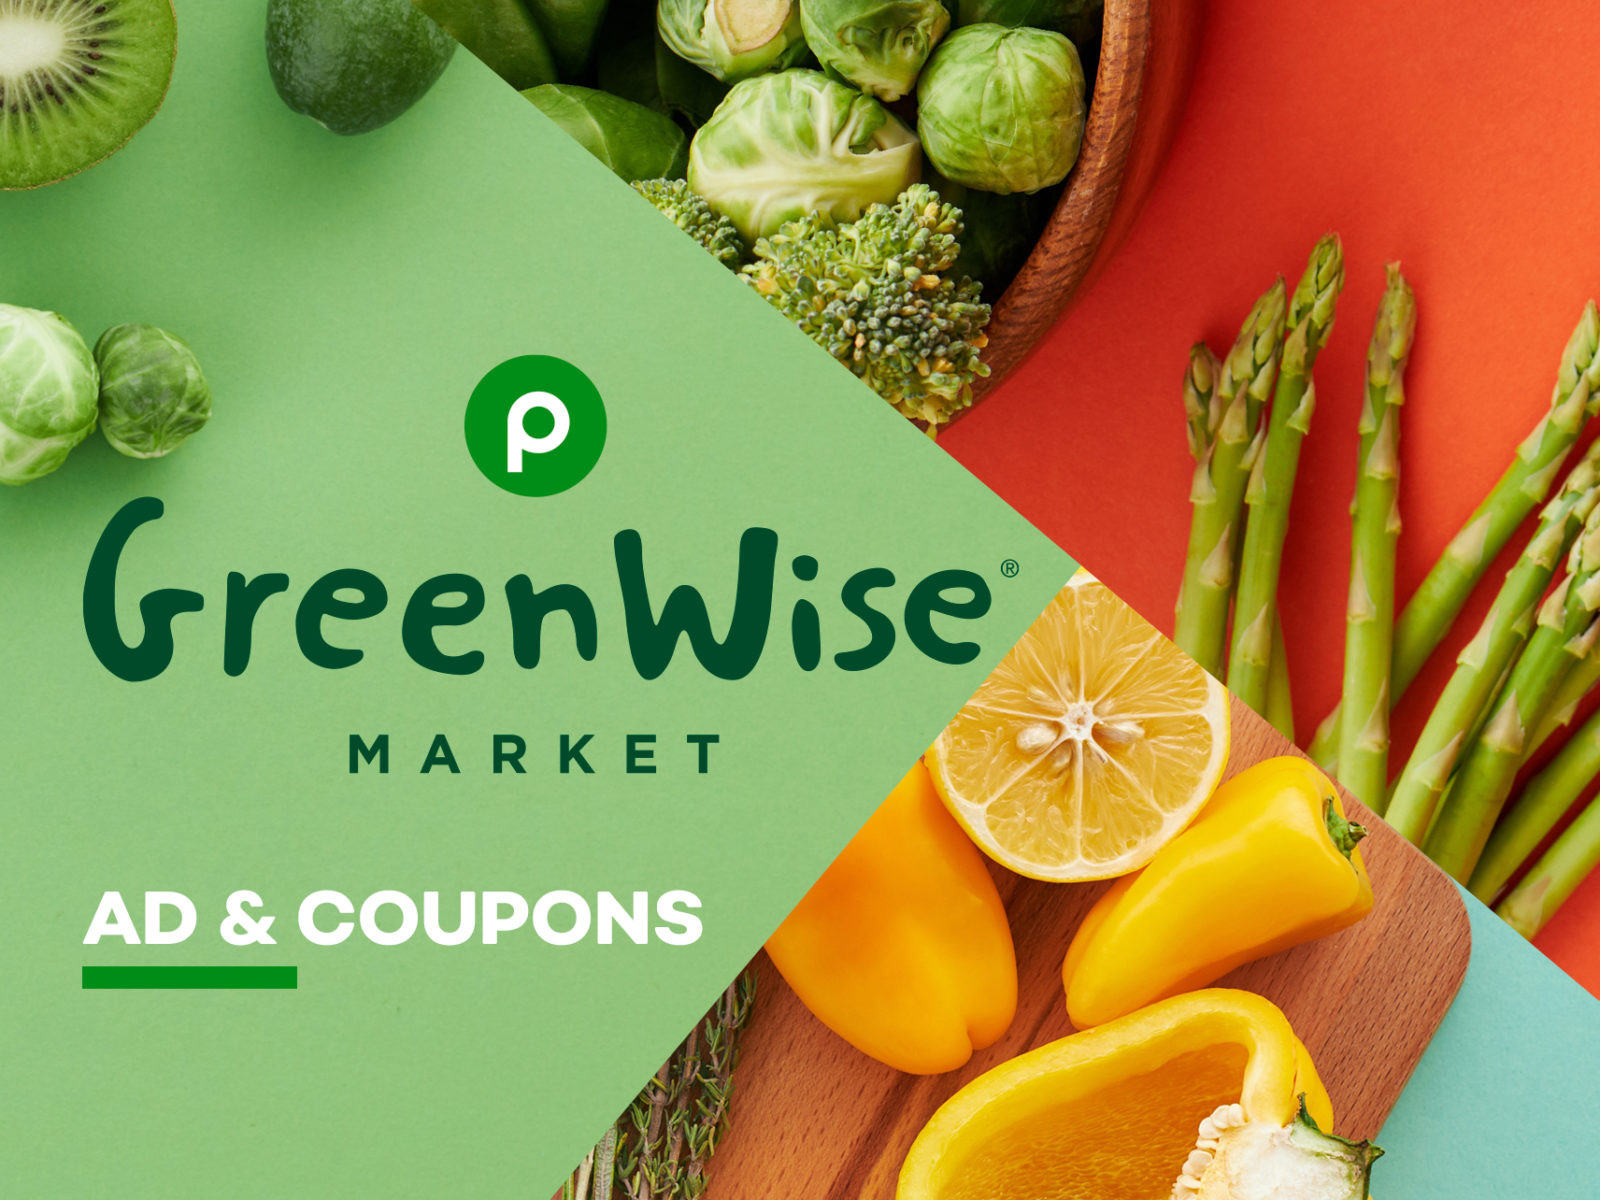 Publix GreenWise Market Ad & Coupons Week Of 8/25 to 8/31 (8/24 to 8/30 For Some)